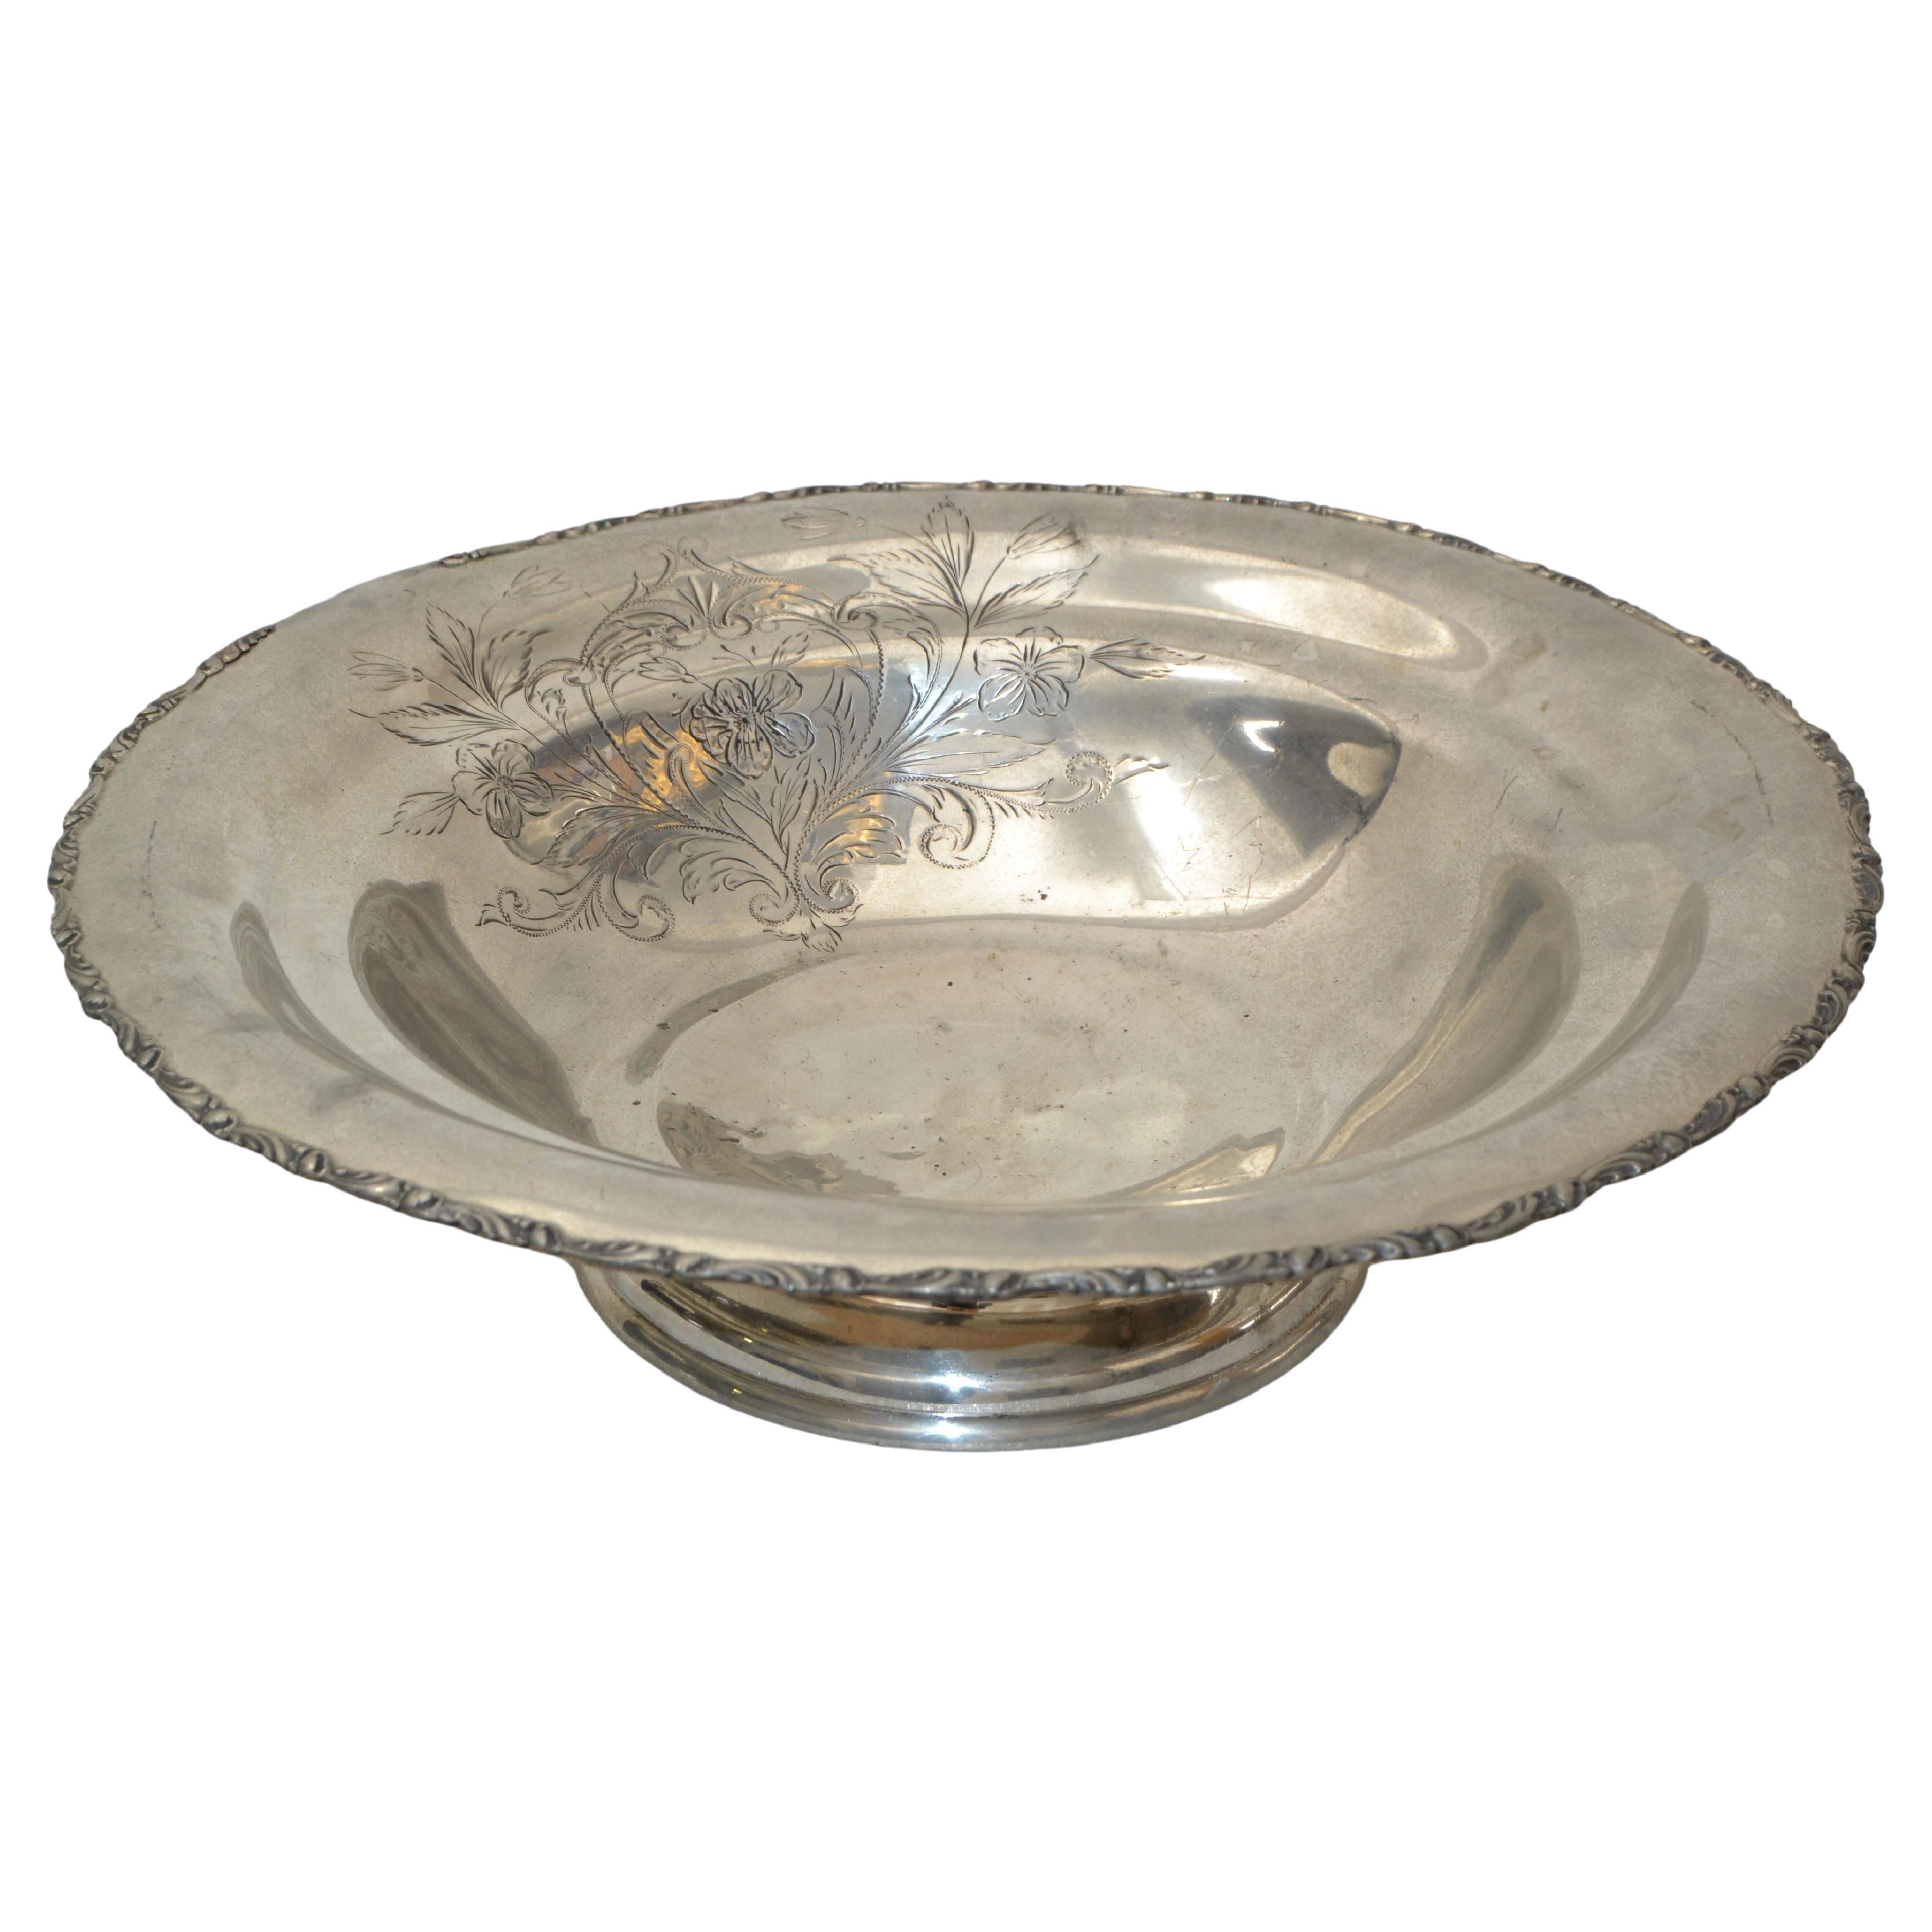 English Silver Plate Trademark Ornate Large Bowl Footed Serving Dish Punch Bowl im Angebot